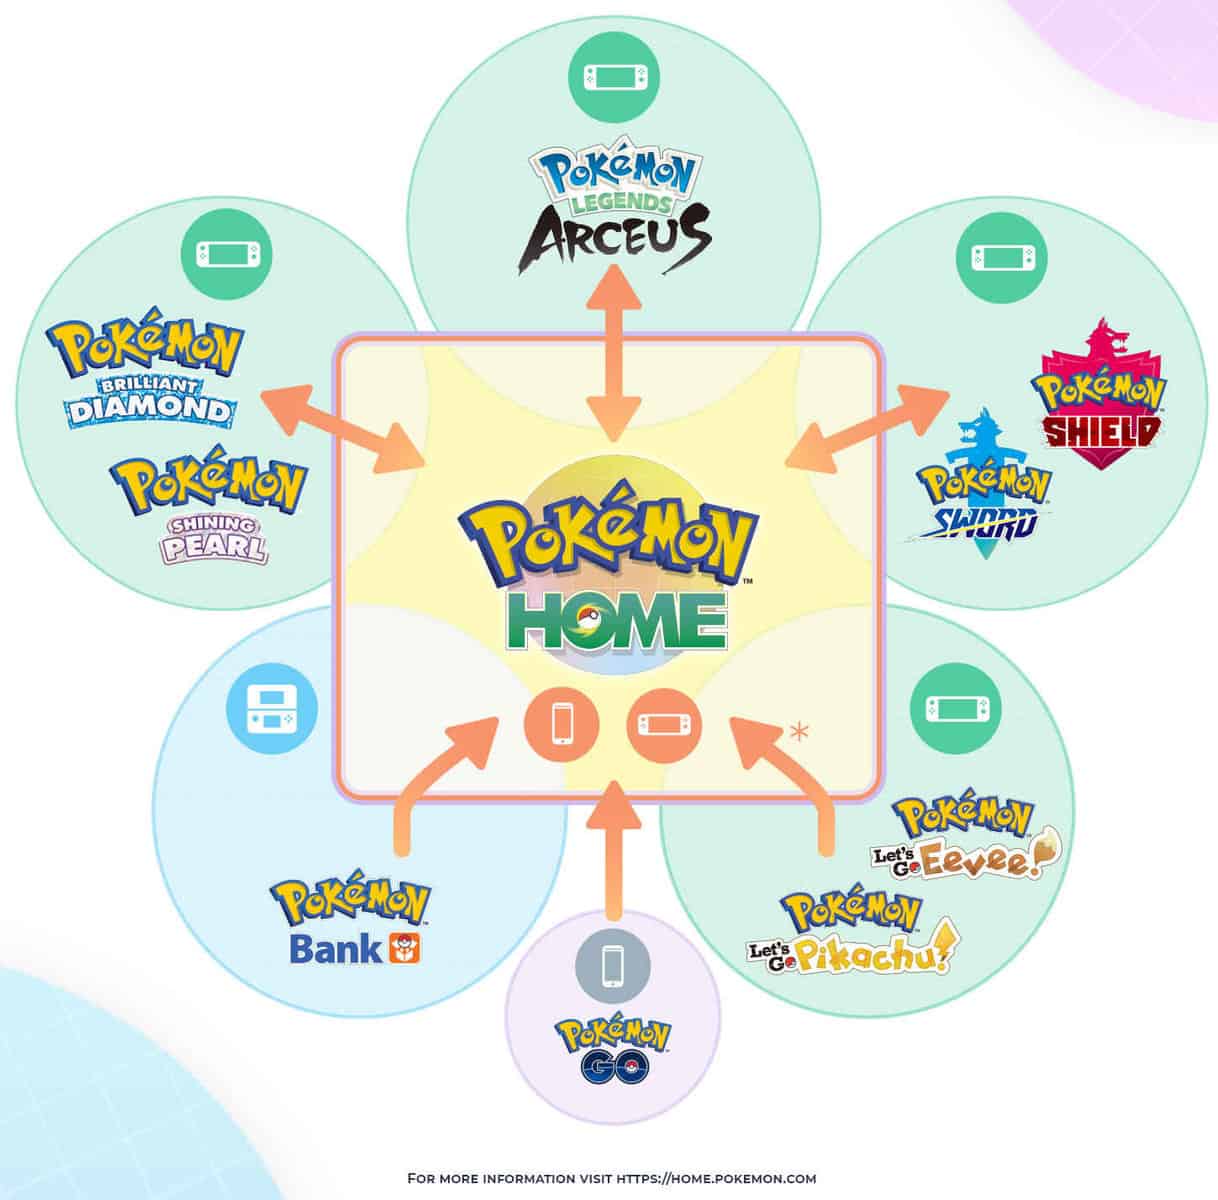 What Pokémon cannot be transferred home? - Quora